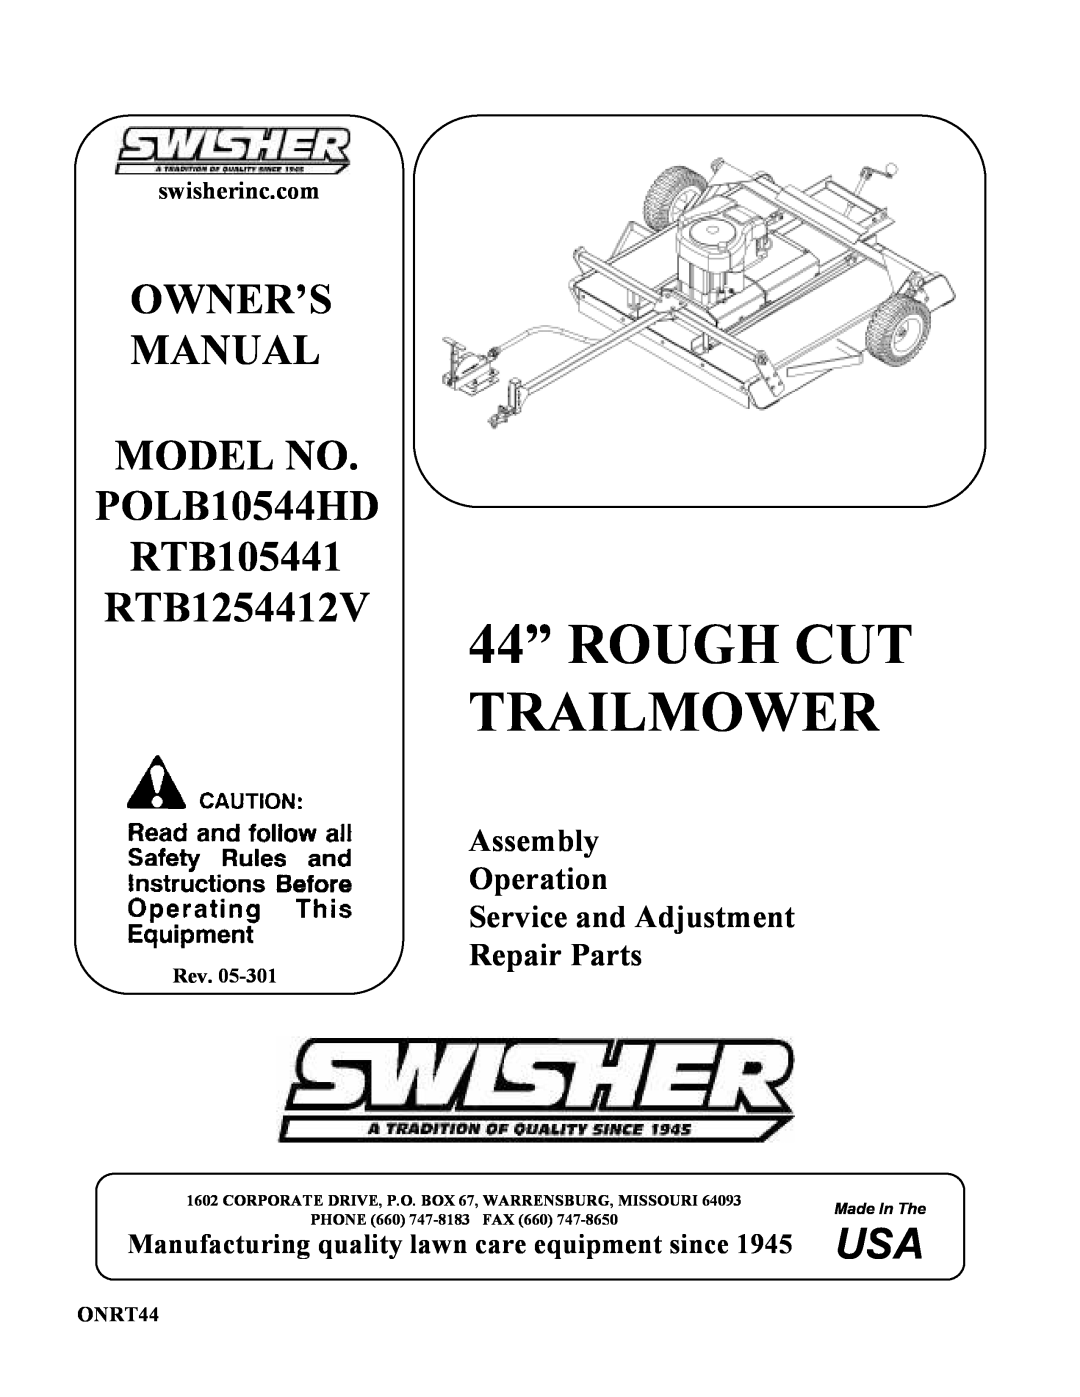 Swisher RTB105441, POLB10544HD, RTB1254412V owner manual Assembly Operation Service and Adjustment, Repair Parts 